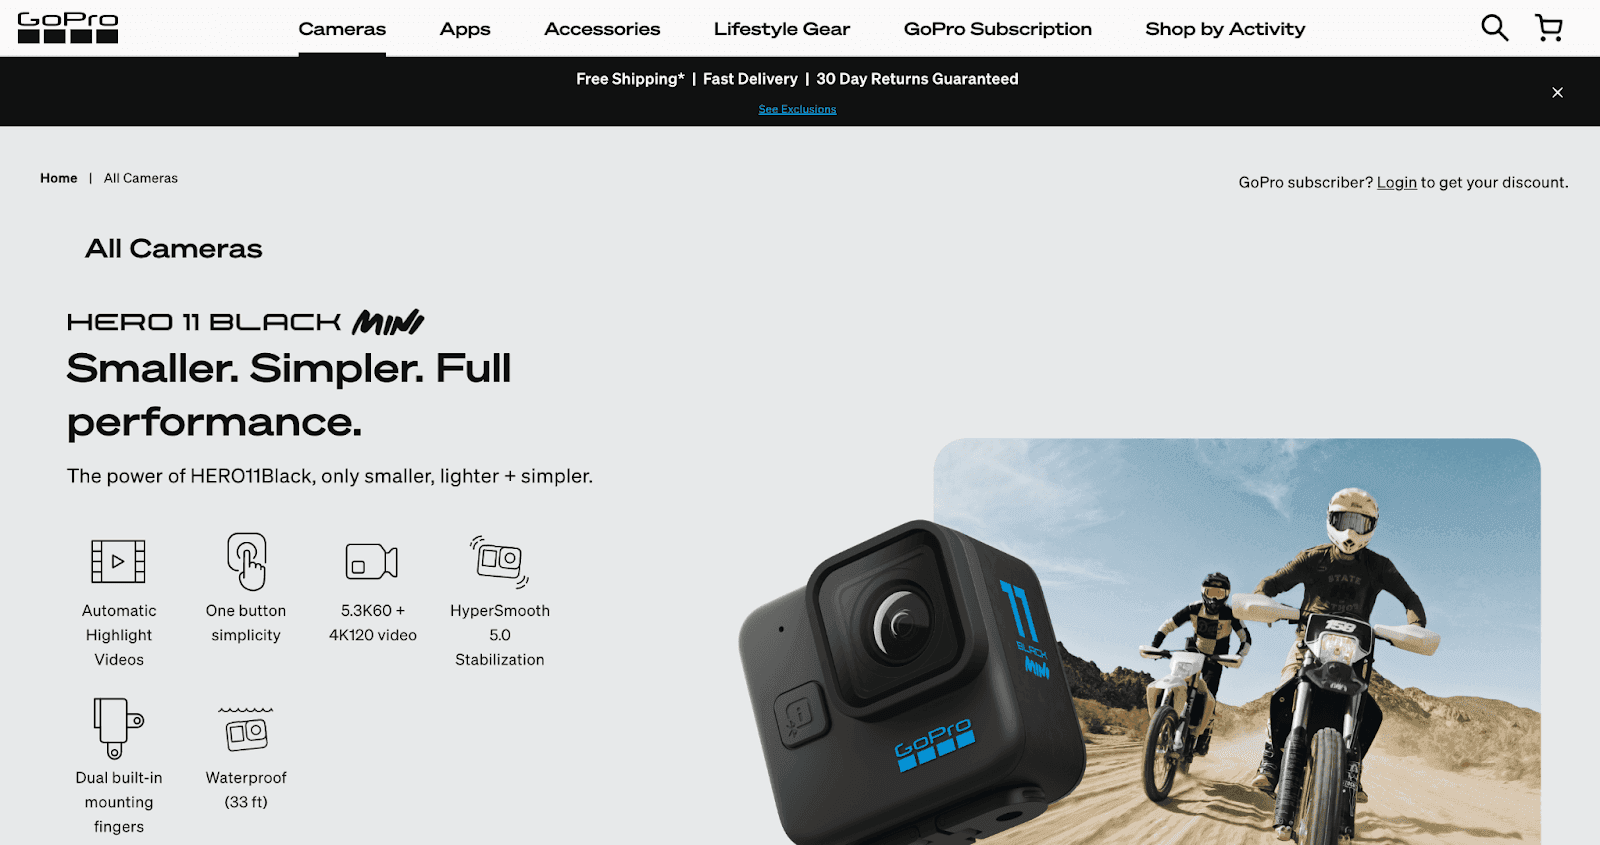 GoPro camera features and photo advertisement 